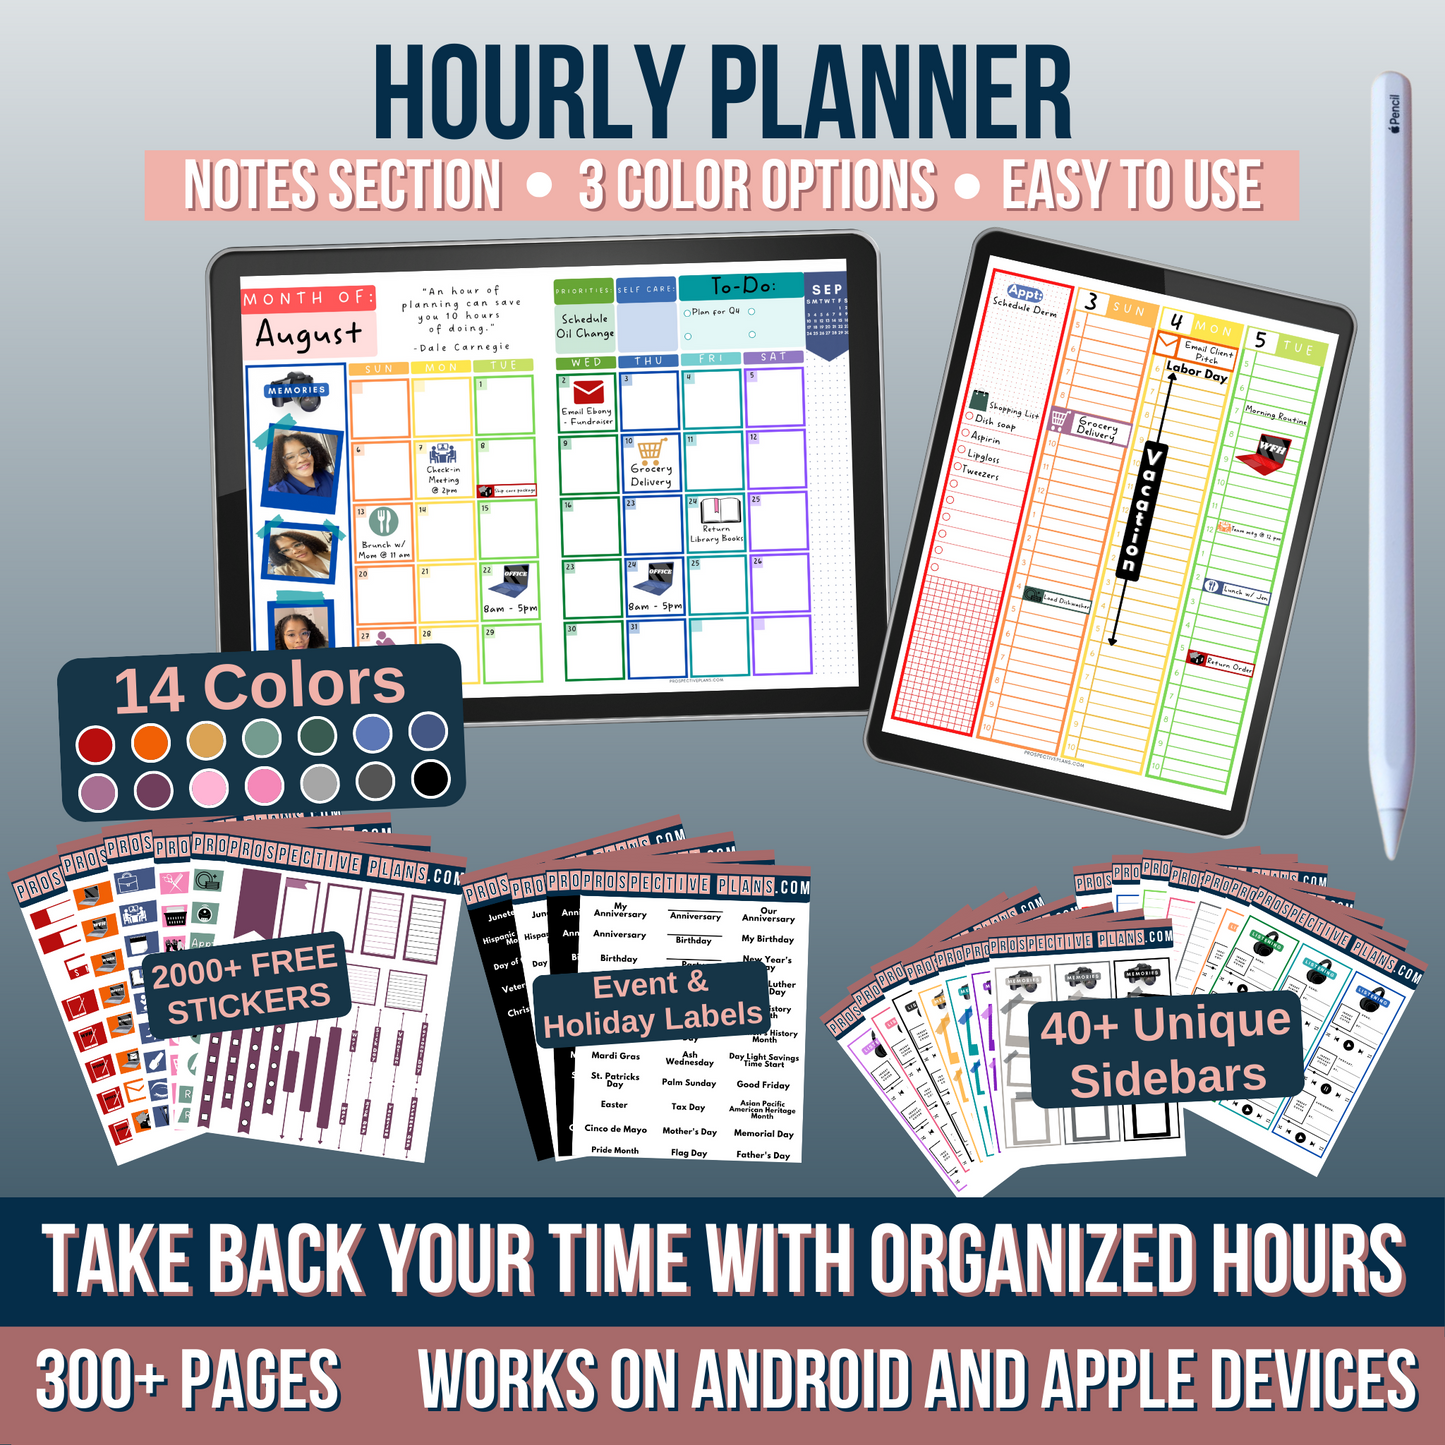 Hourly Planner Bundle | 2000 Stickers